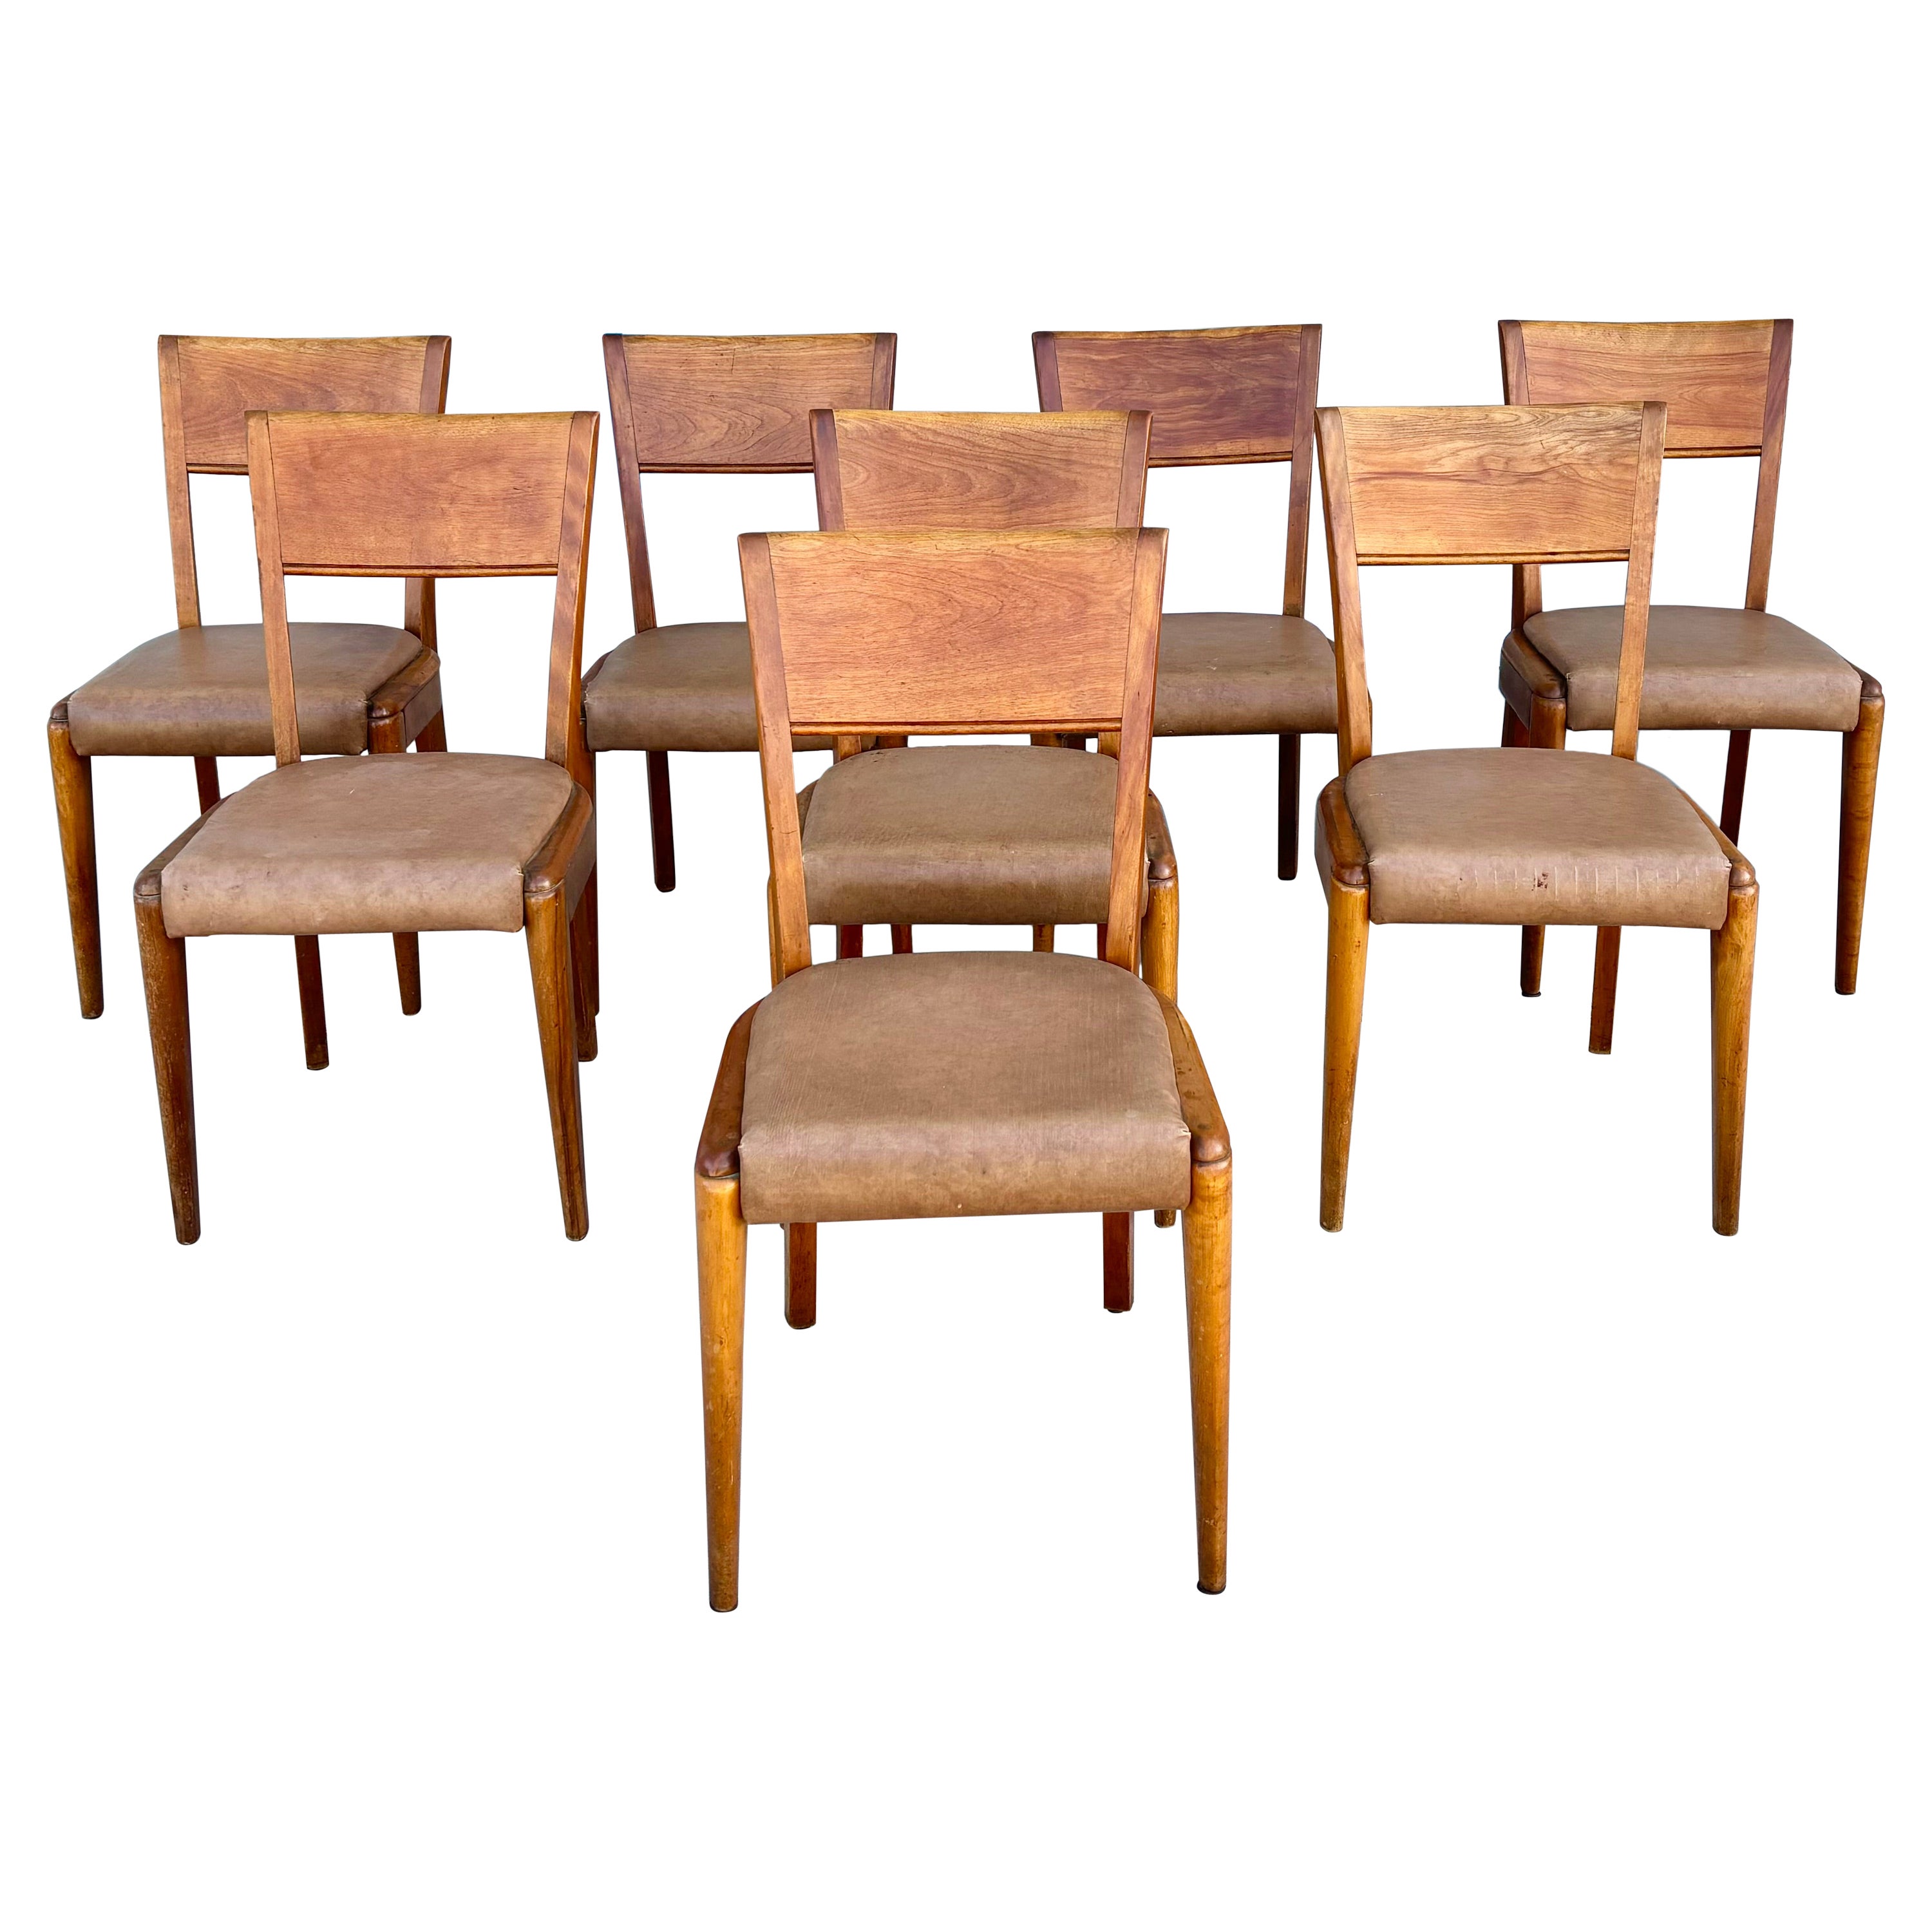 1960s Mid Century Maple Dining Chairs by Heywood Wakefield - Set of 8